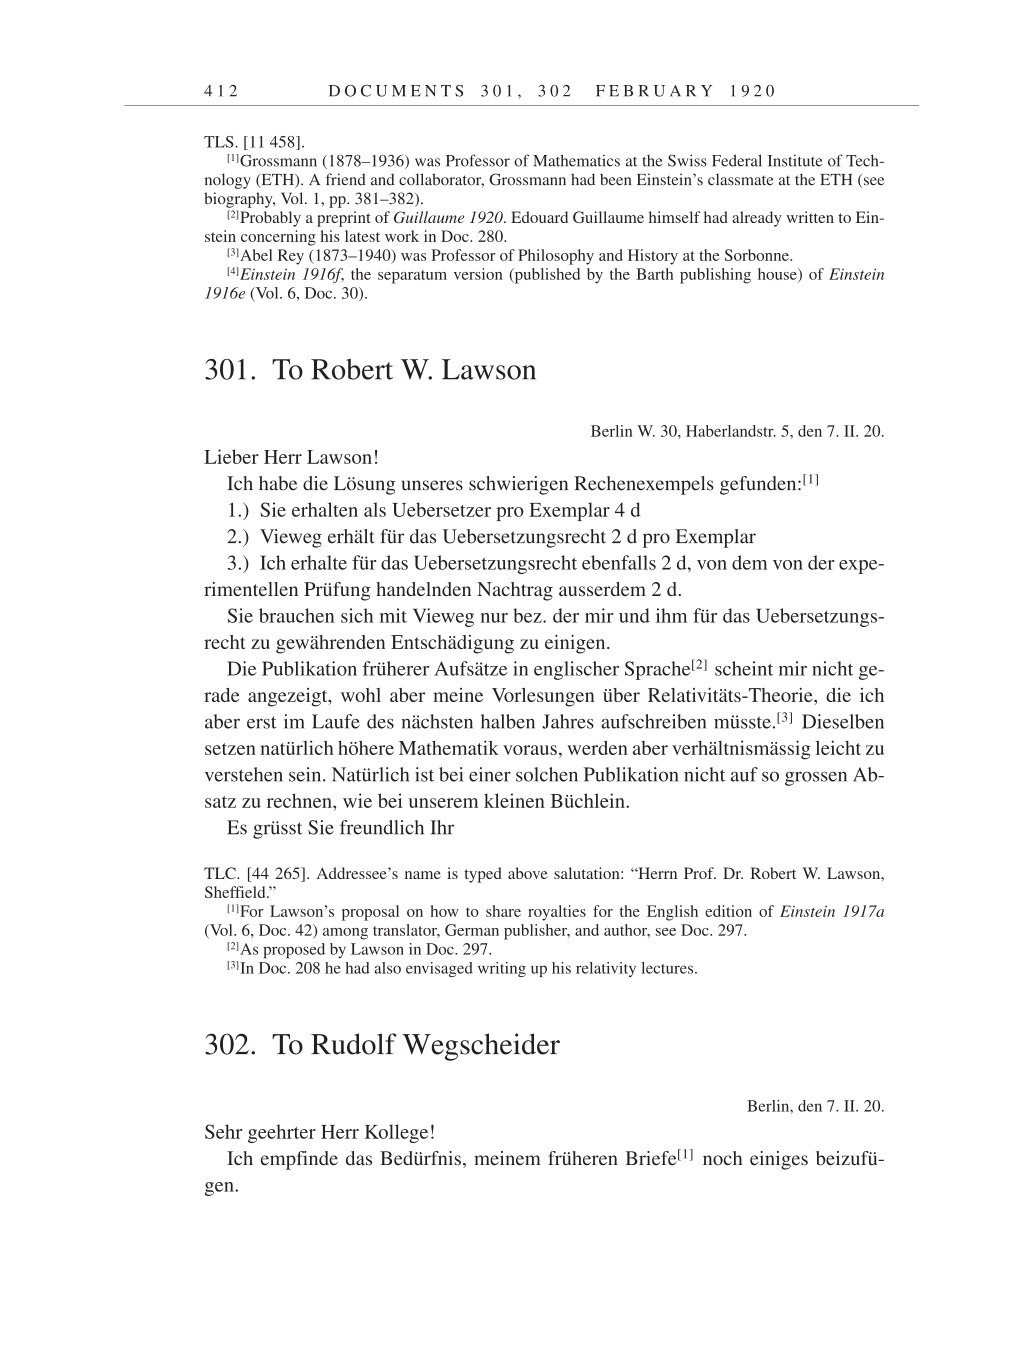 Volume 9: The Berlin Years: Correspondence January 1919-April 1920 page 412